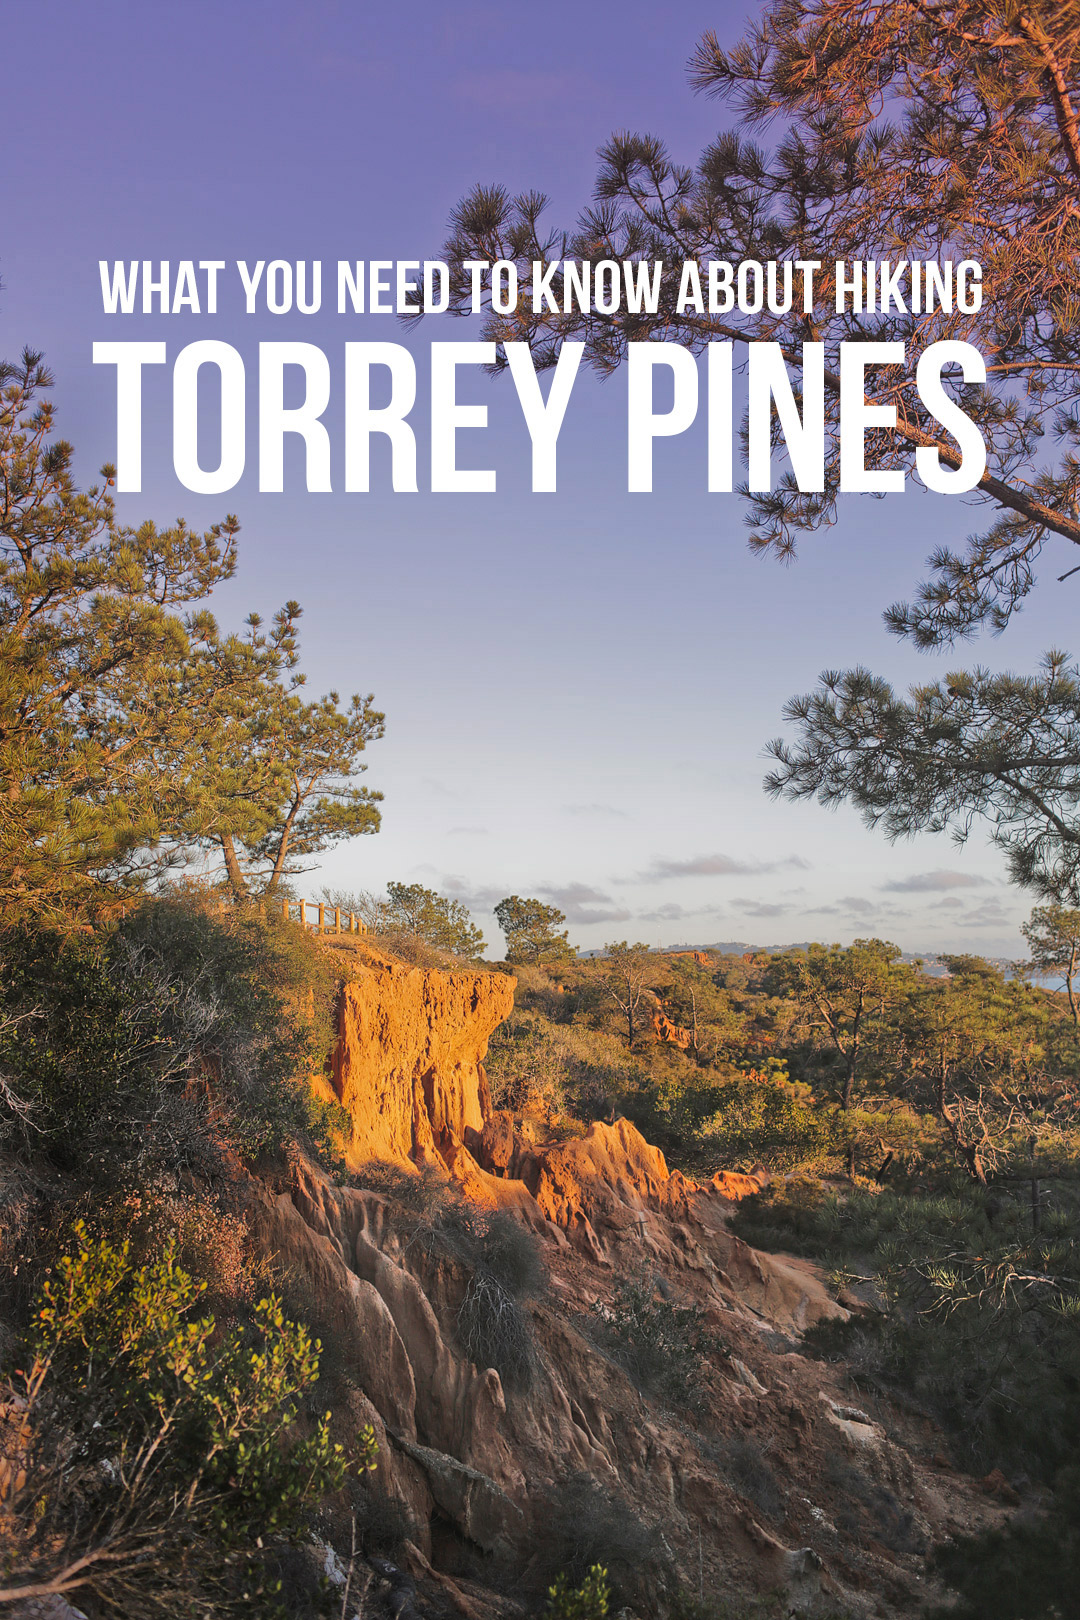 Your Essential Guide to the Torrey Pines Trails in San Diego, Torrey Pines Natural State Reserve - Best Hikes in San Diego // Local Adventurer #sandiego #hiking #california #torreypines